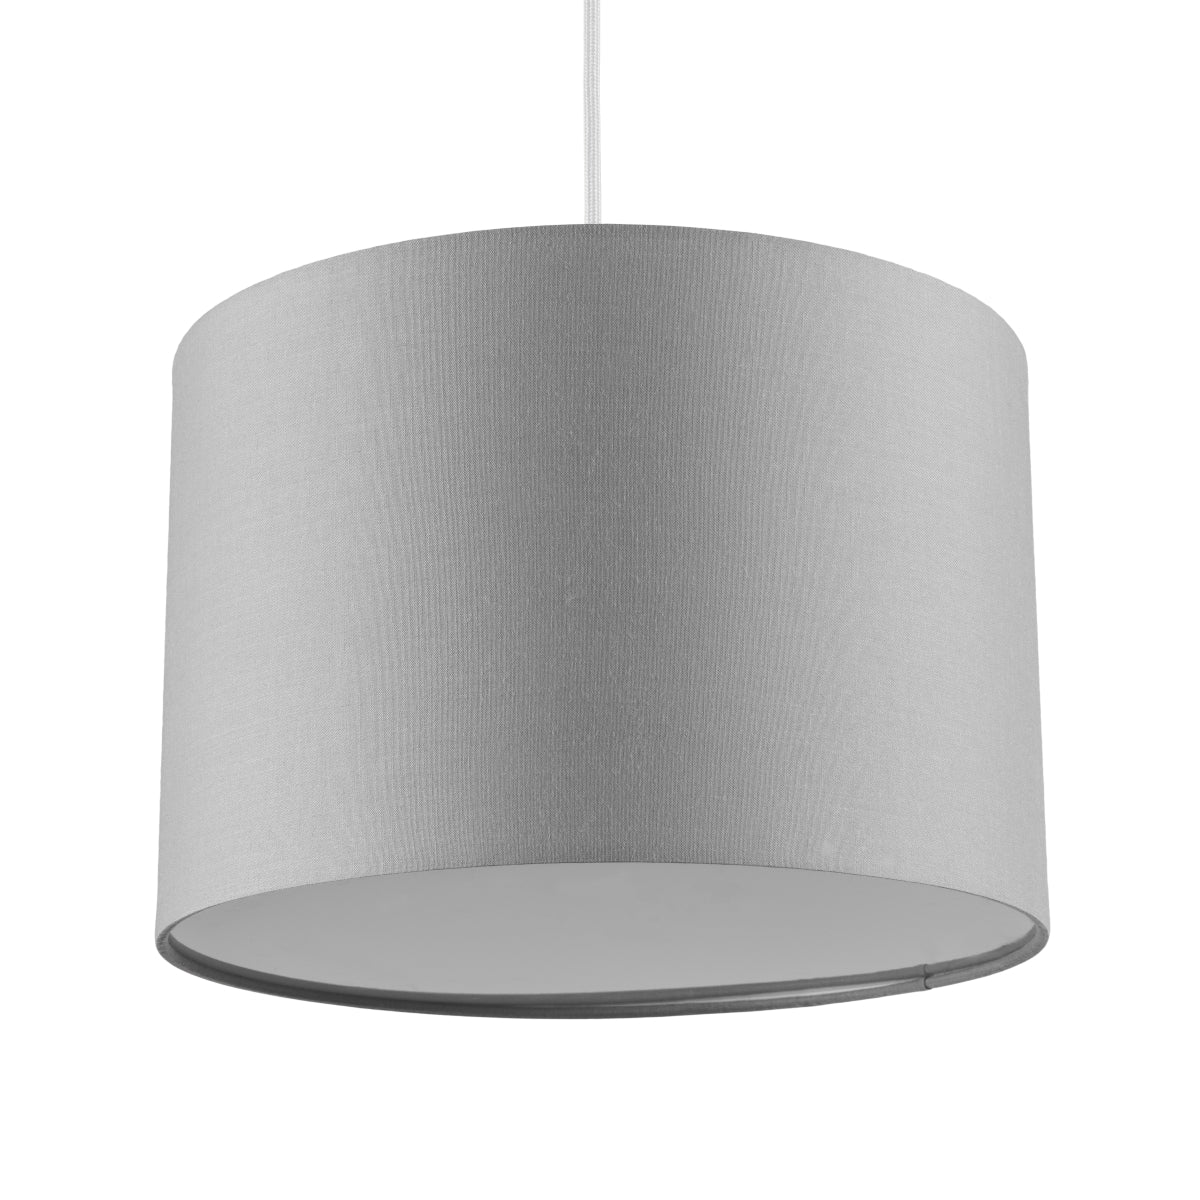 The Lucia is a modern cylinder drum shaped lamp shade in a luxury cotton finish and opal diffuser. This fantastic shade can double up as either a ceiling pendant light shade or table lampshade. Easily fits to your standard ceiling light fitting- no wiring required.